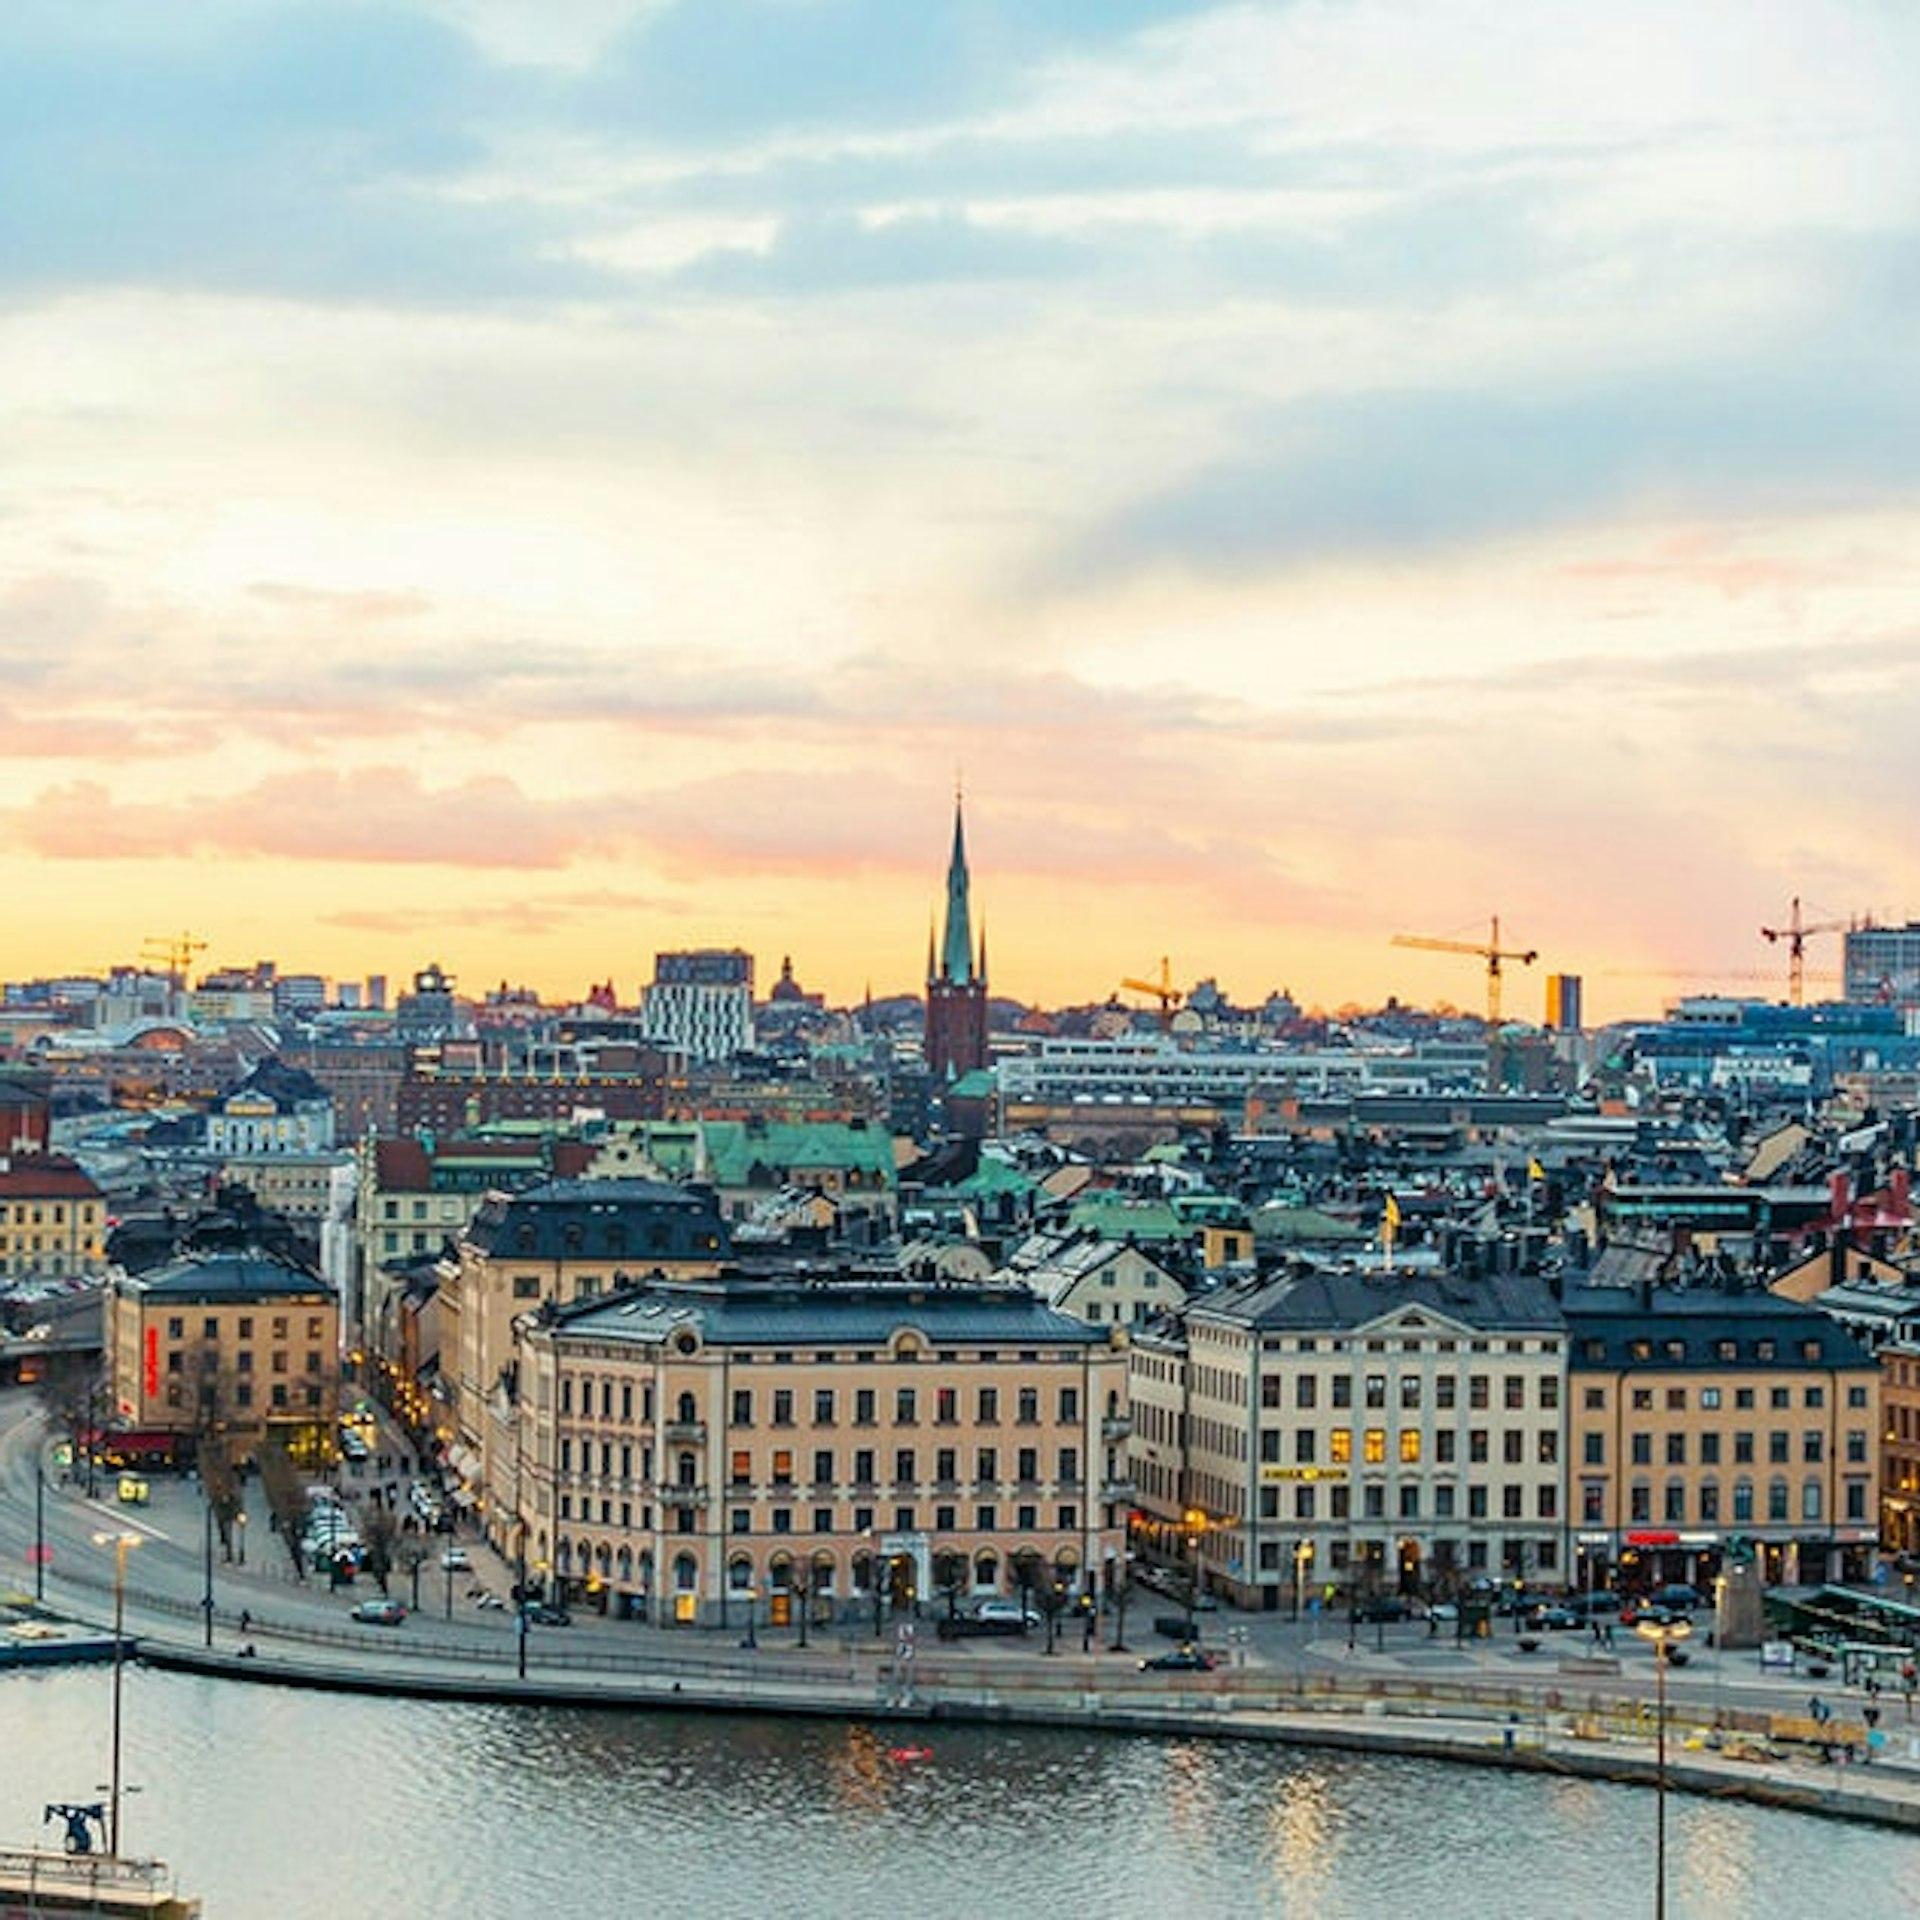 Get the latest news and updates on e-invoicing, e-ordering, e-archiving and indirect tax regulatory requirements for Sweden.